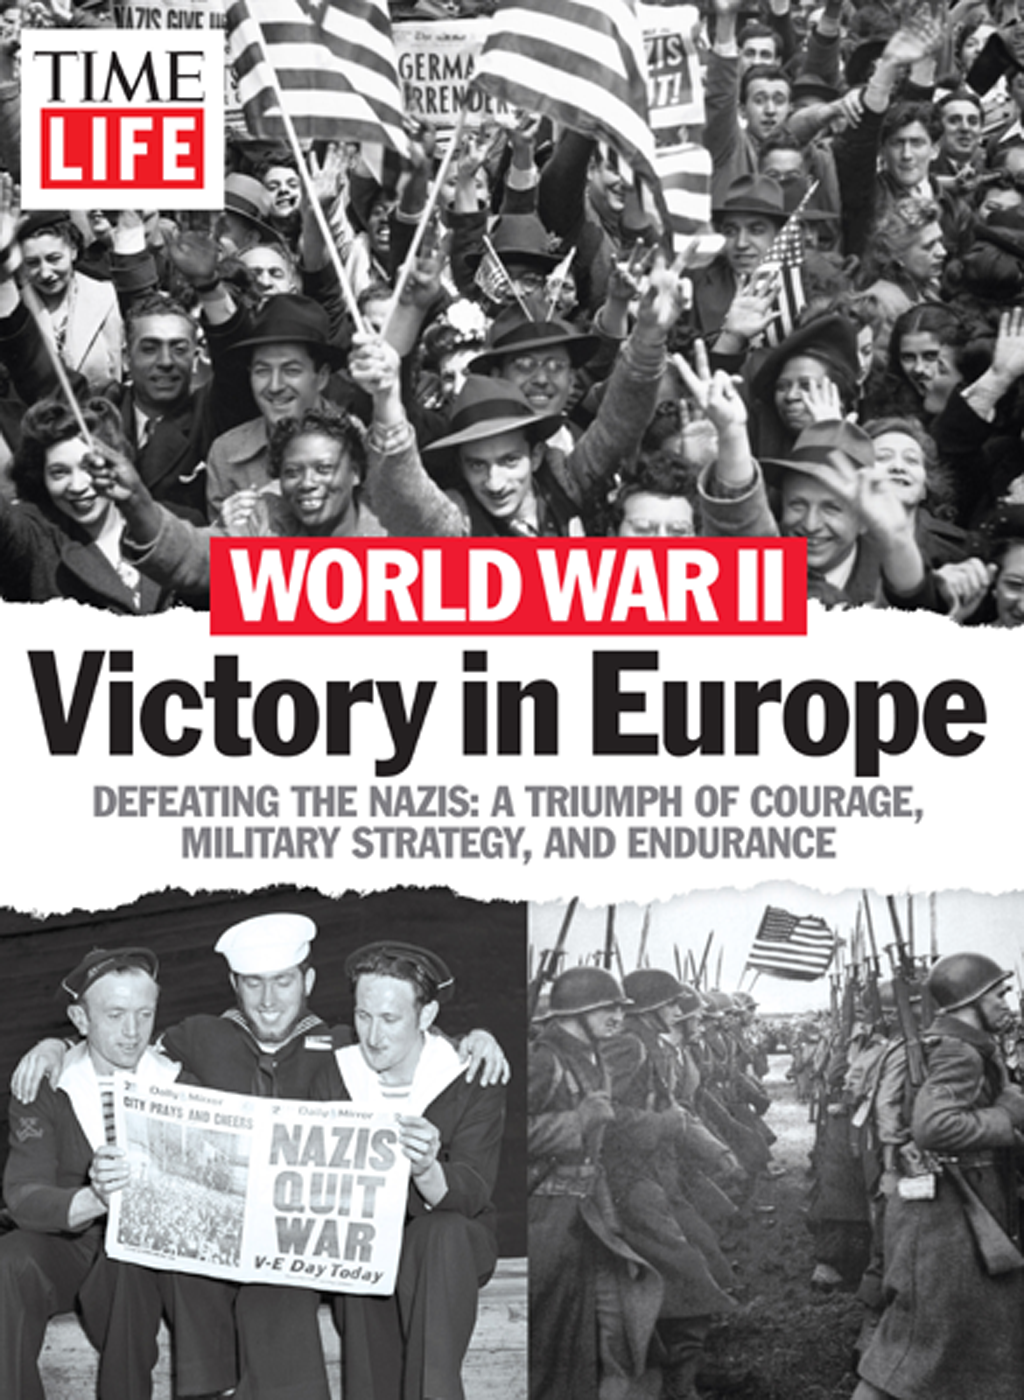 WORLD WAR II Victory In Europe DEFEATING THE NAZIS A TRIUMPH OF COURAGE - photo 2